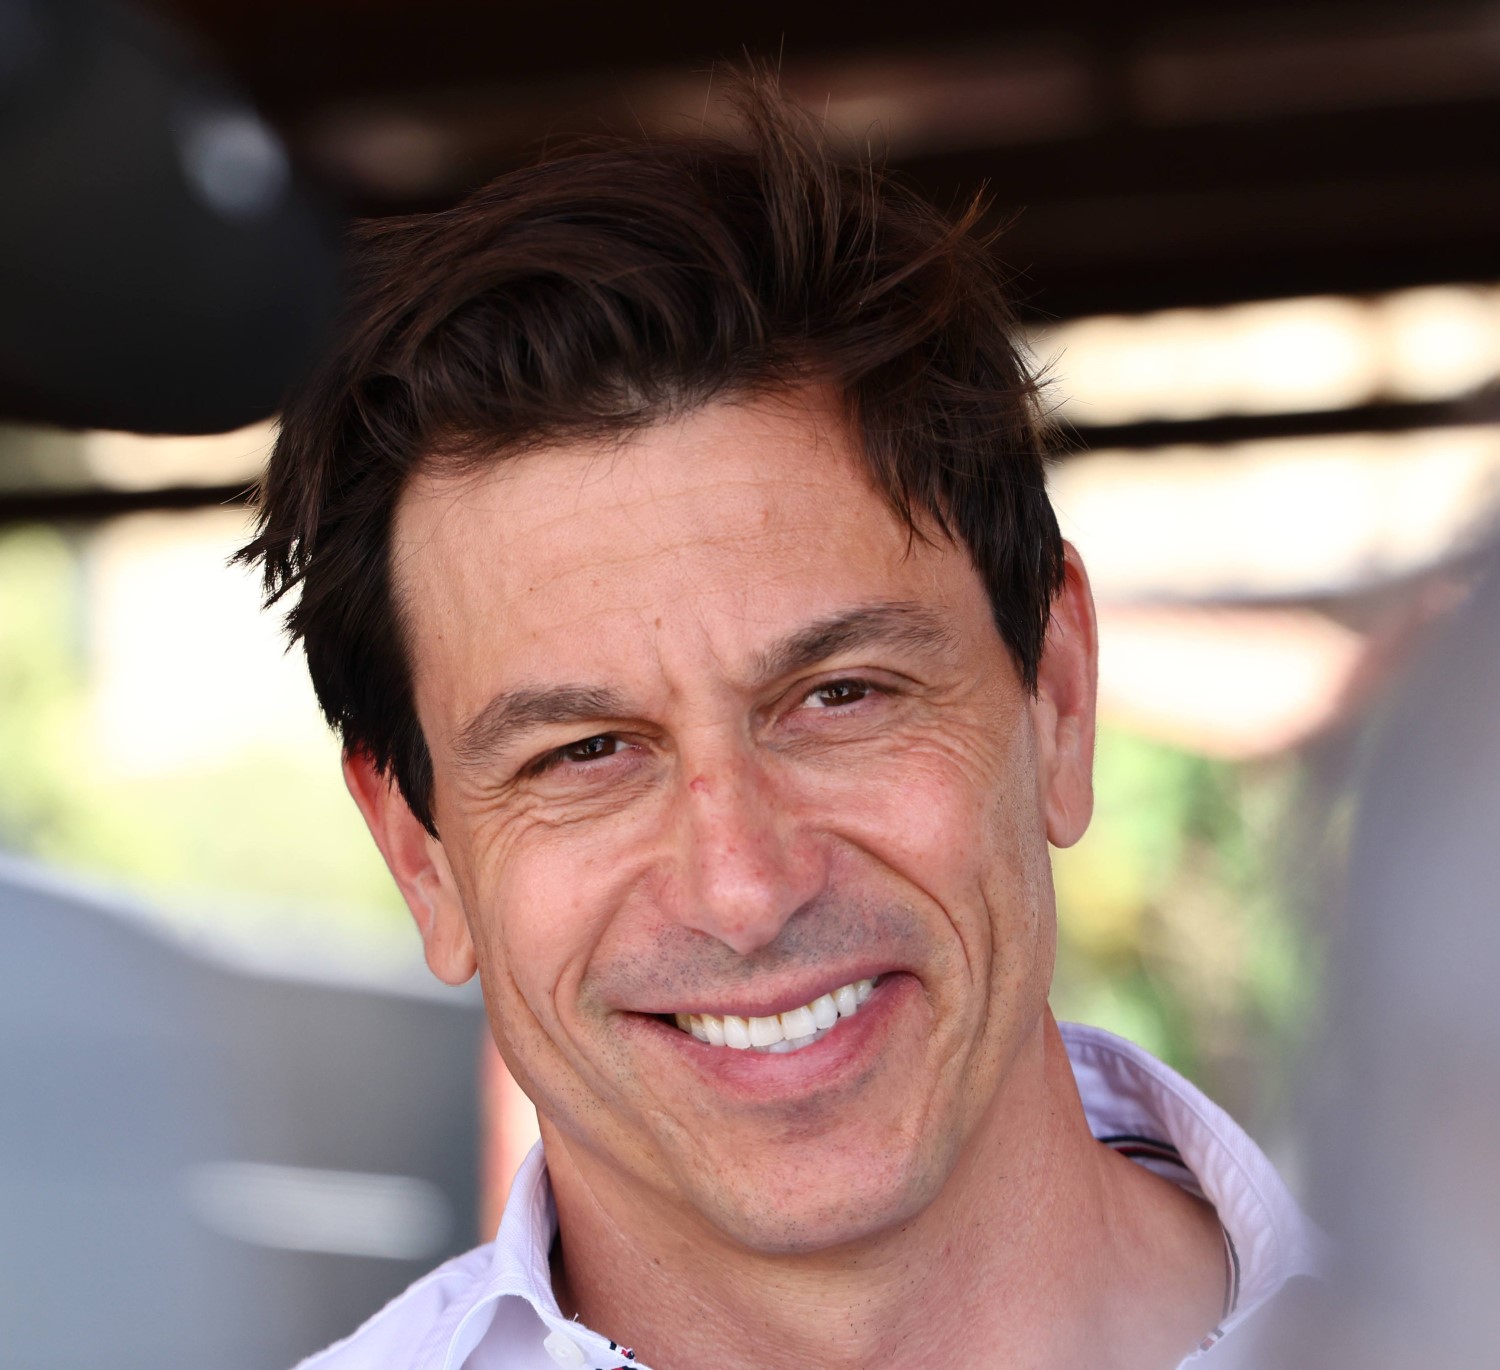 Mercedes F1 Team Boss Toto Wolff. Photo courtesy of Mercedes